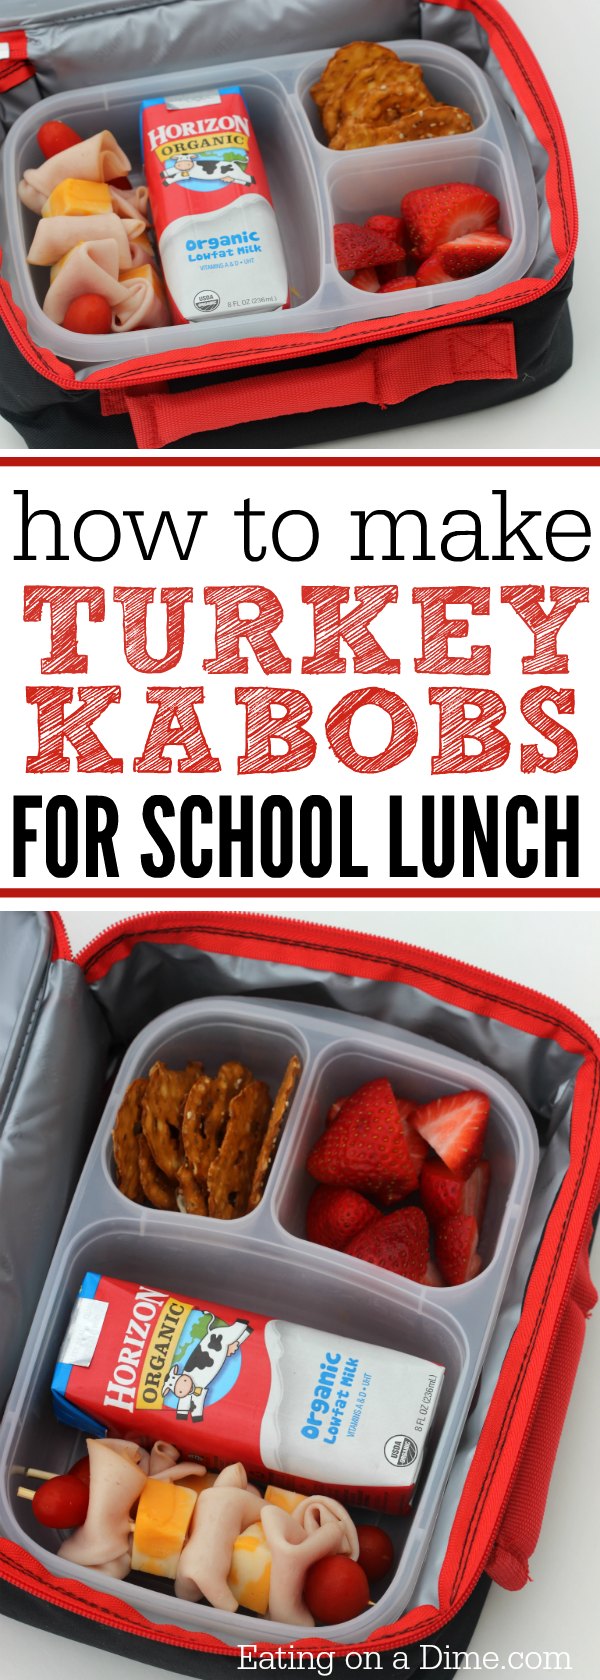 Turkey and Cheese Kabob Recipe- school lunch ideas for kids